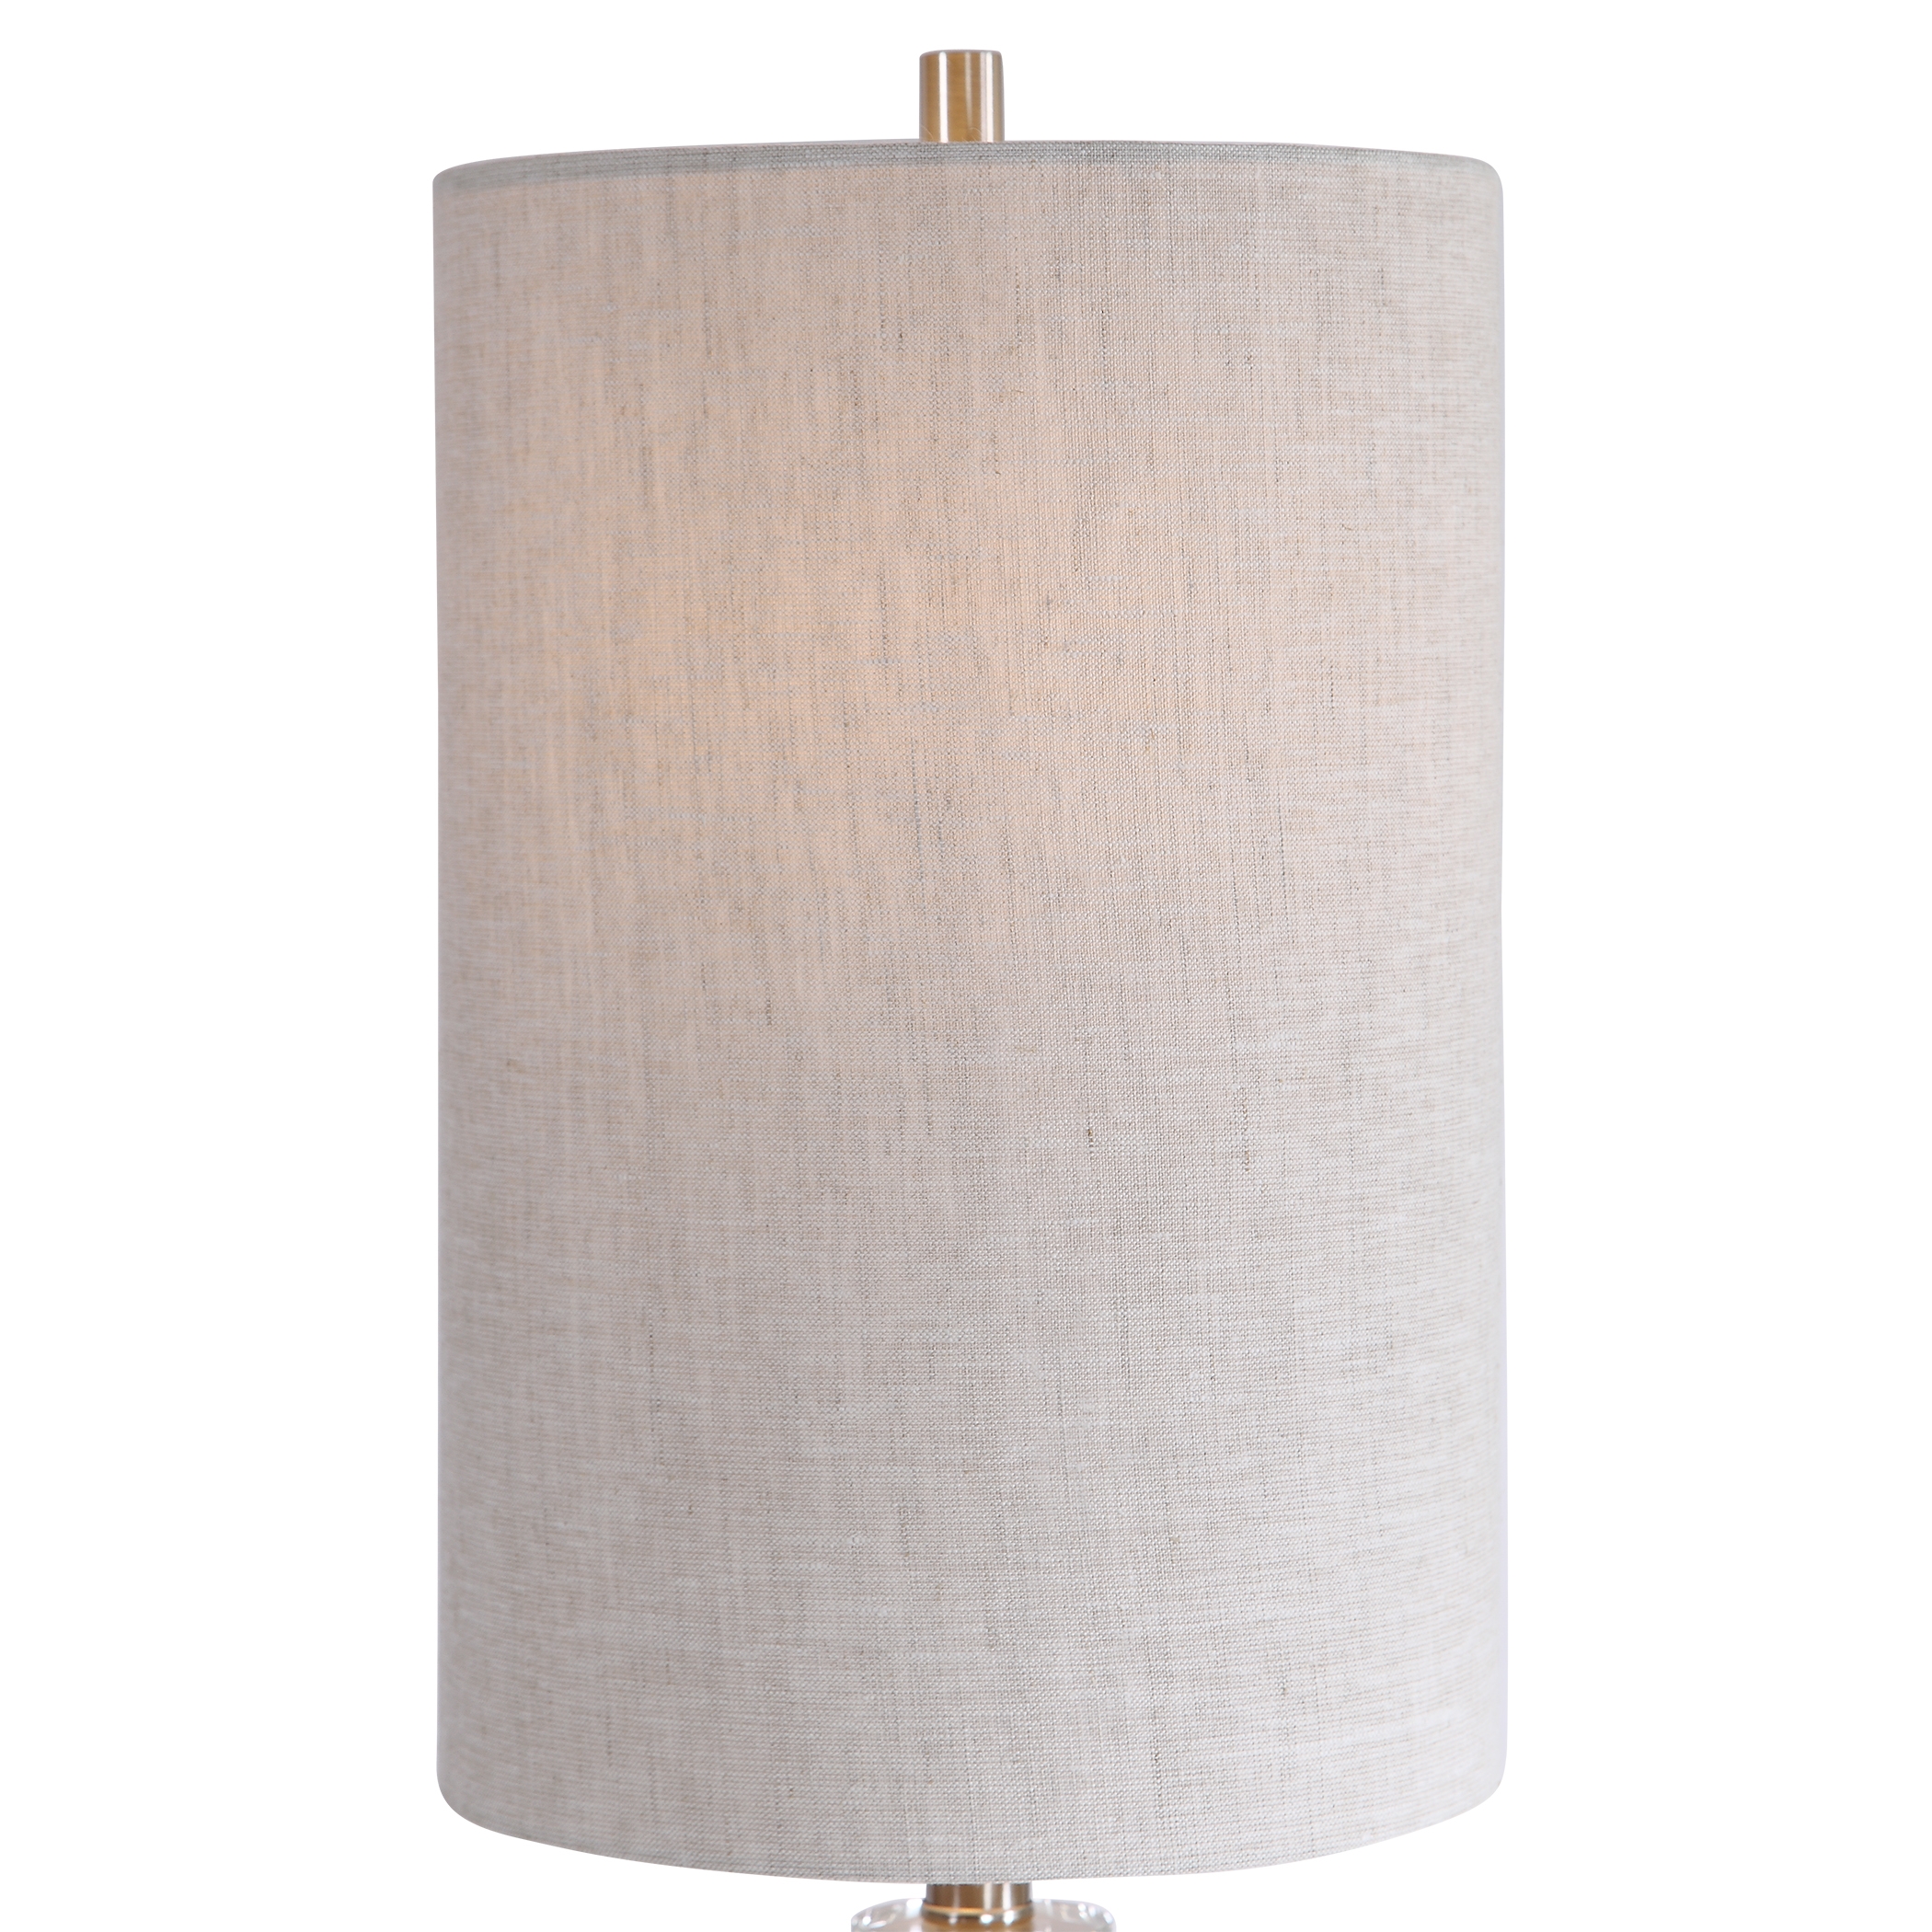 Elyn Glossy White Accent Lamp - Image 4